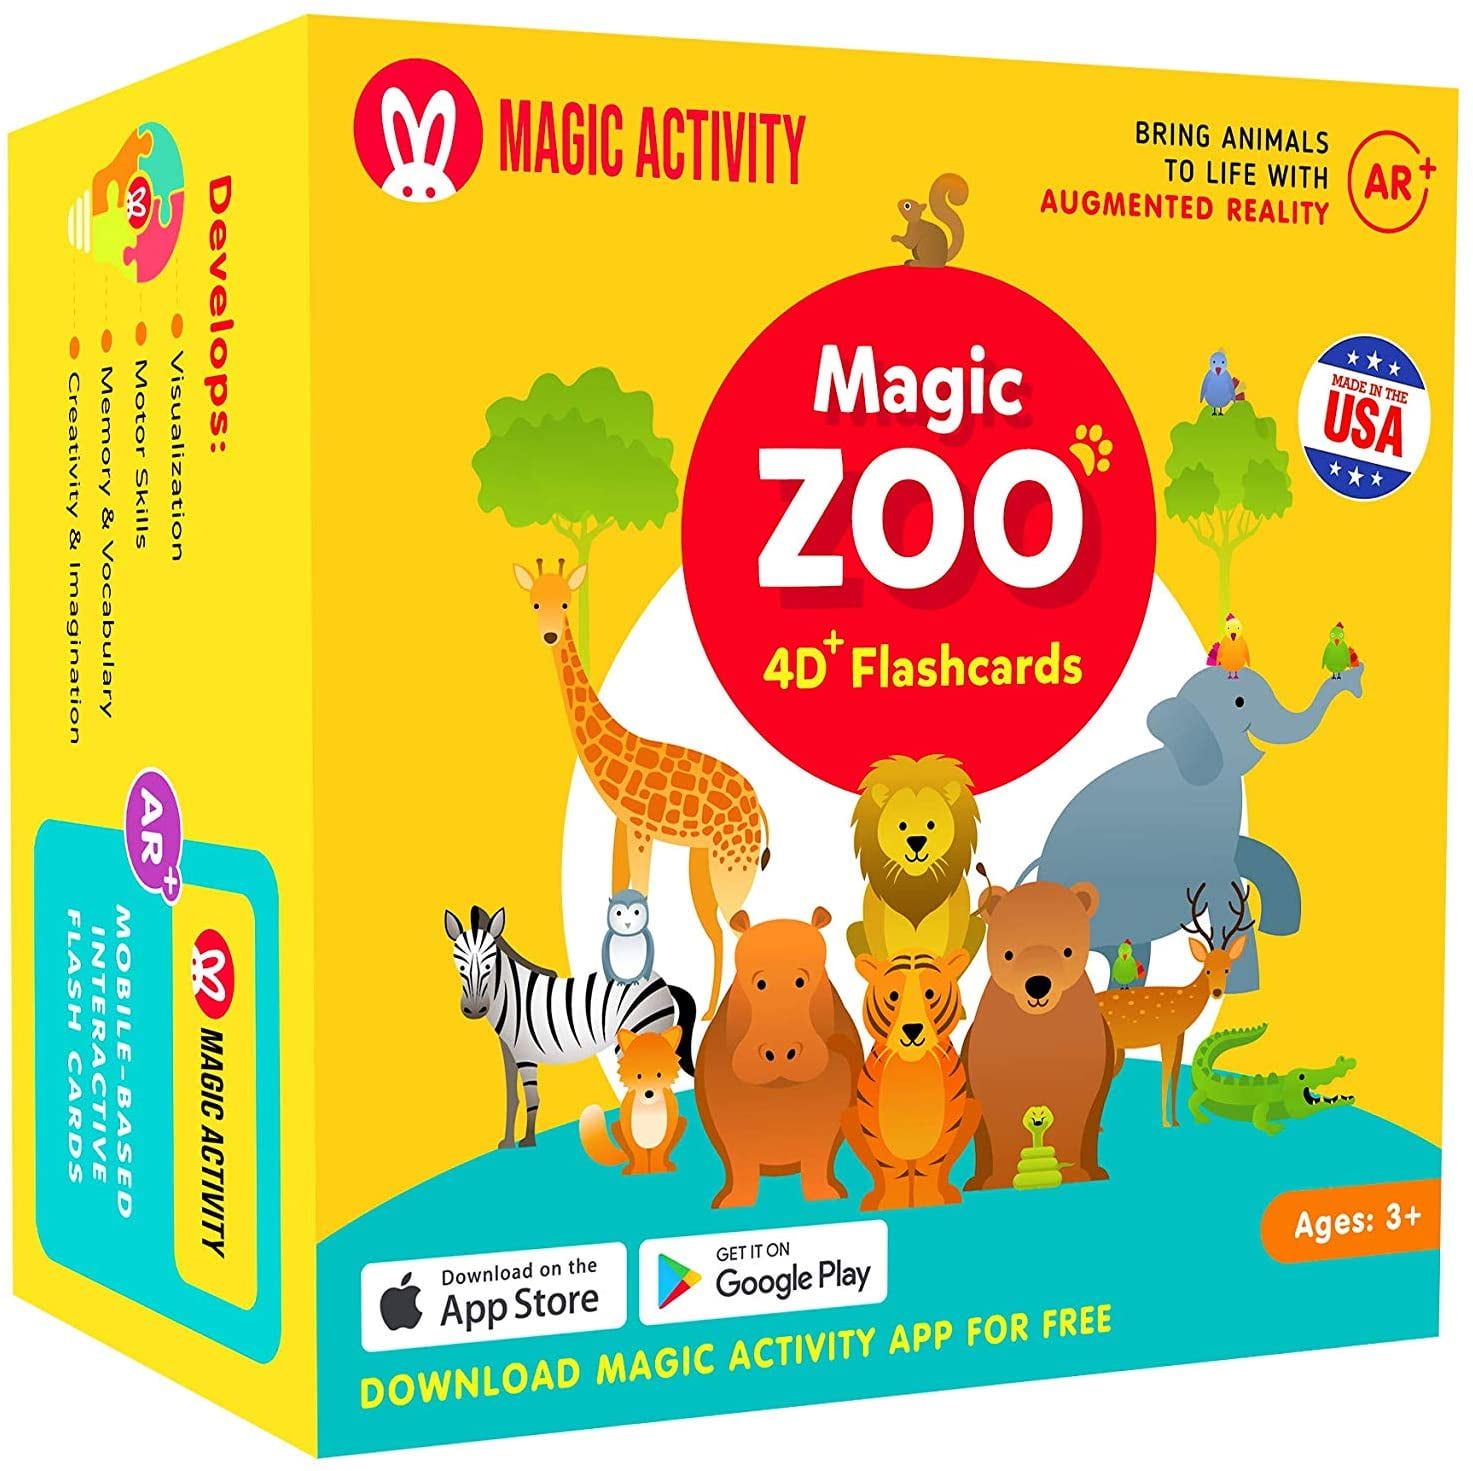 Flash Cards Fancy Zoo Fun Education Animals Augmented Reality 4D AR Learning Car 